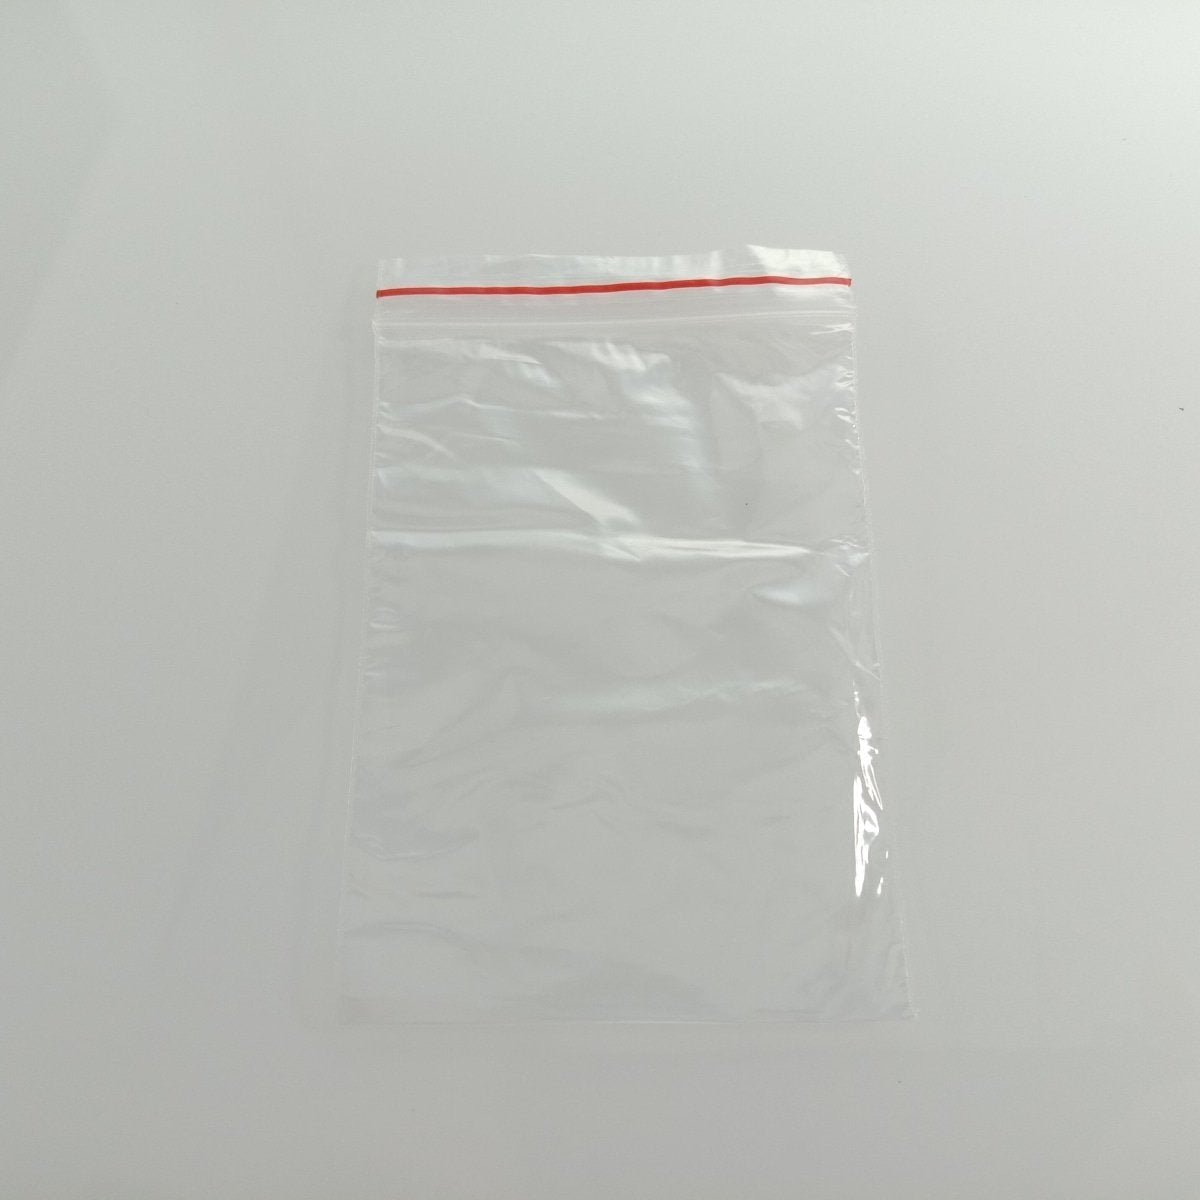 100pcs Clipseal Bags 7x10cm Satchels Small Plastic Zip Bags Sealer Thin - Asia Sell